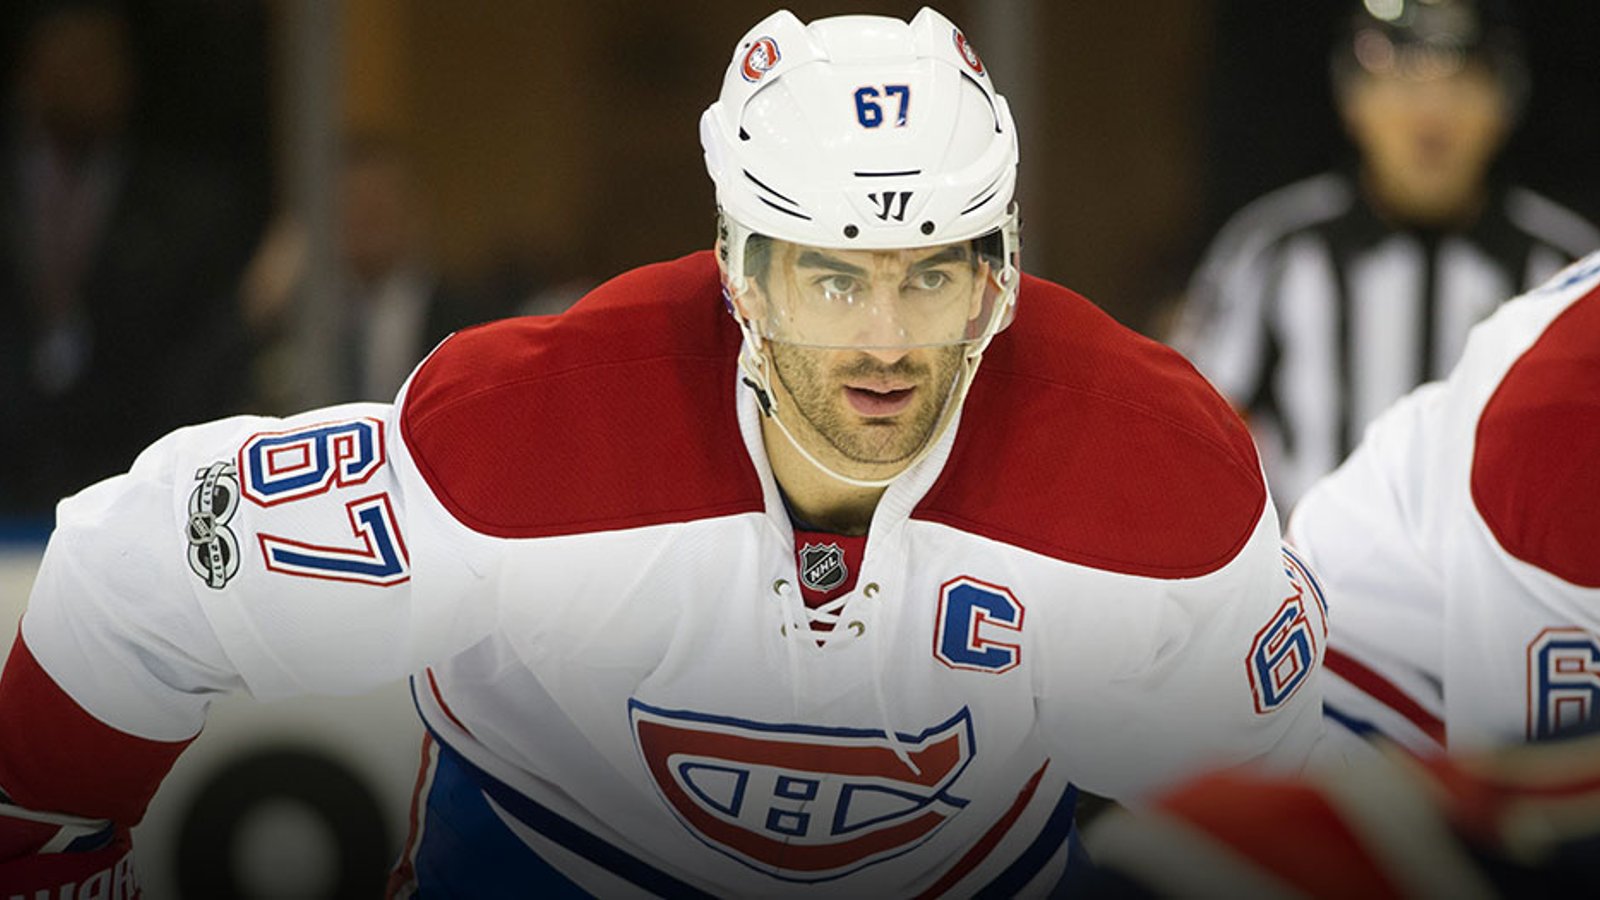 Breaking: Shocking personal news for Habs captain Pacioretty